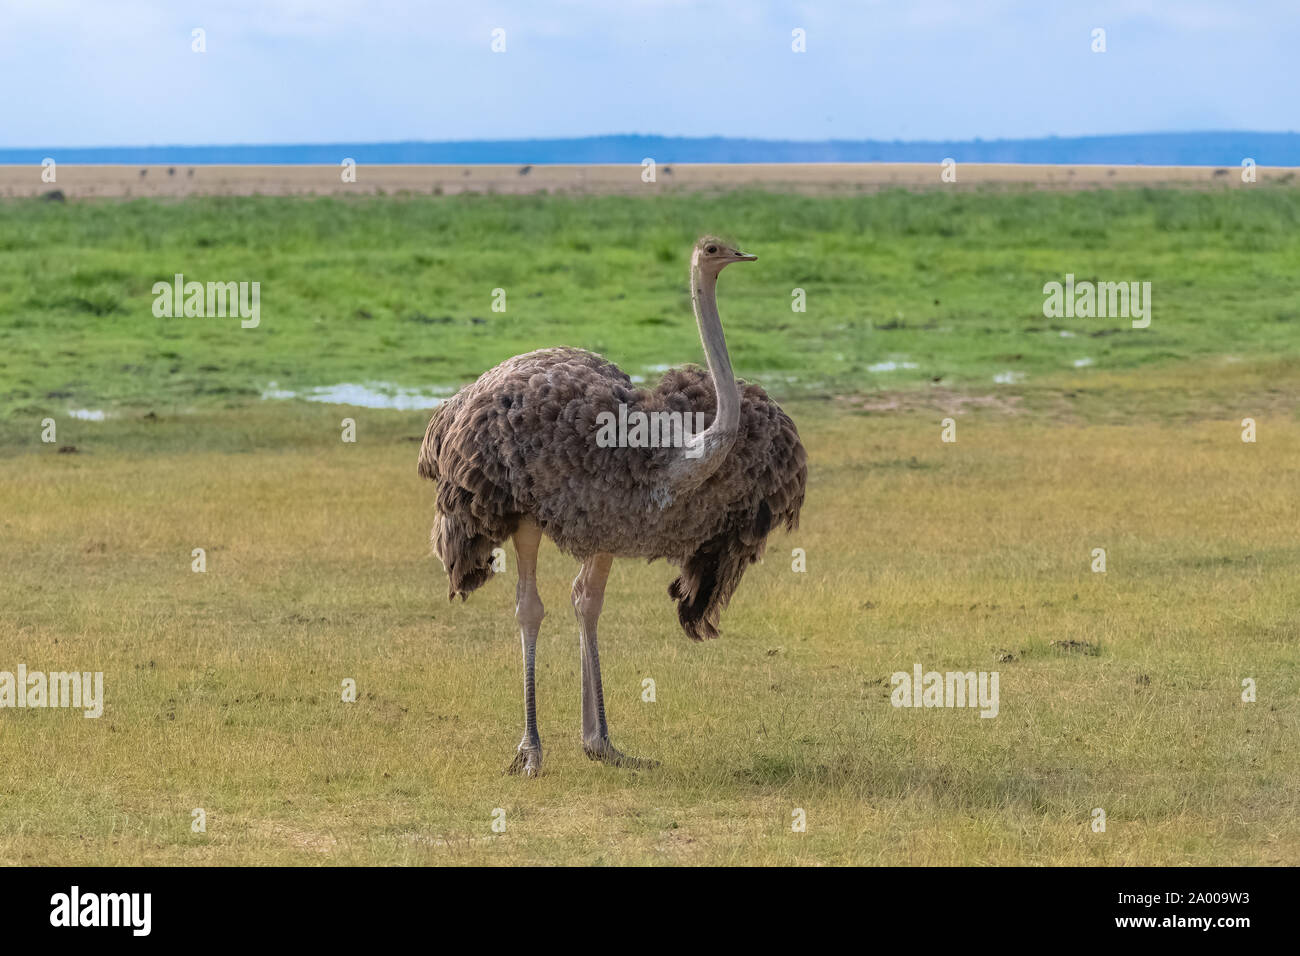 Common Ostrich in Africa, Ngorongoro crater, female eating in the savannah Stock Photo